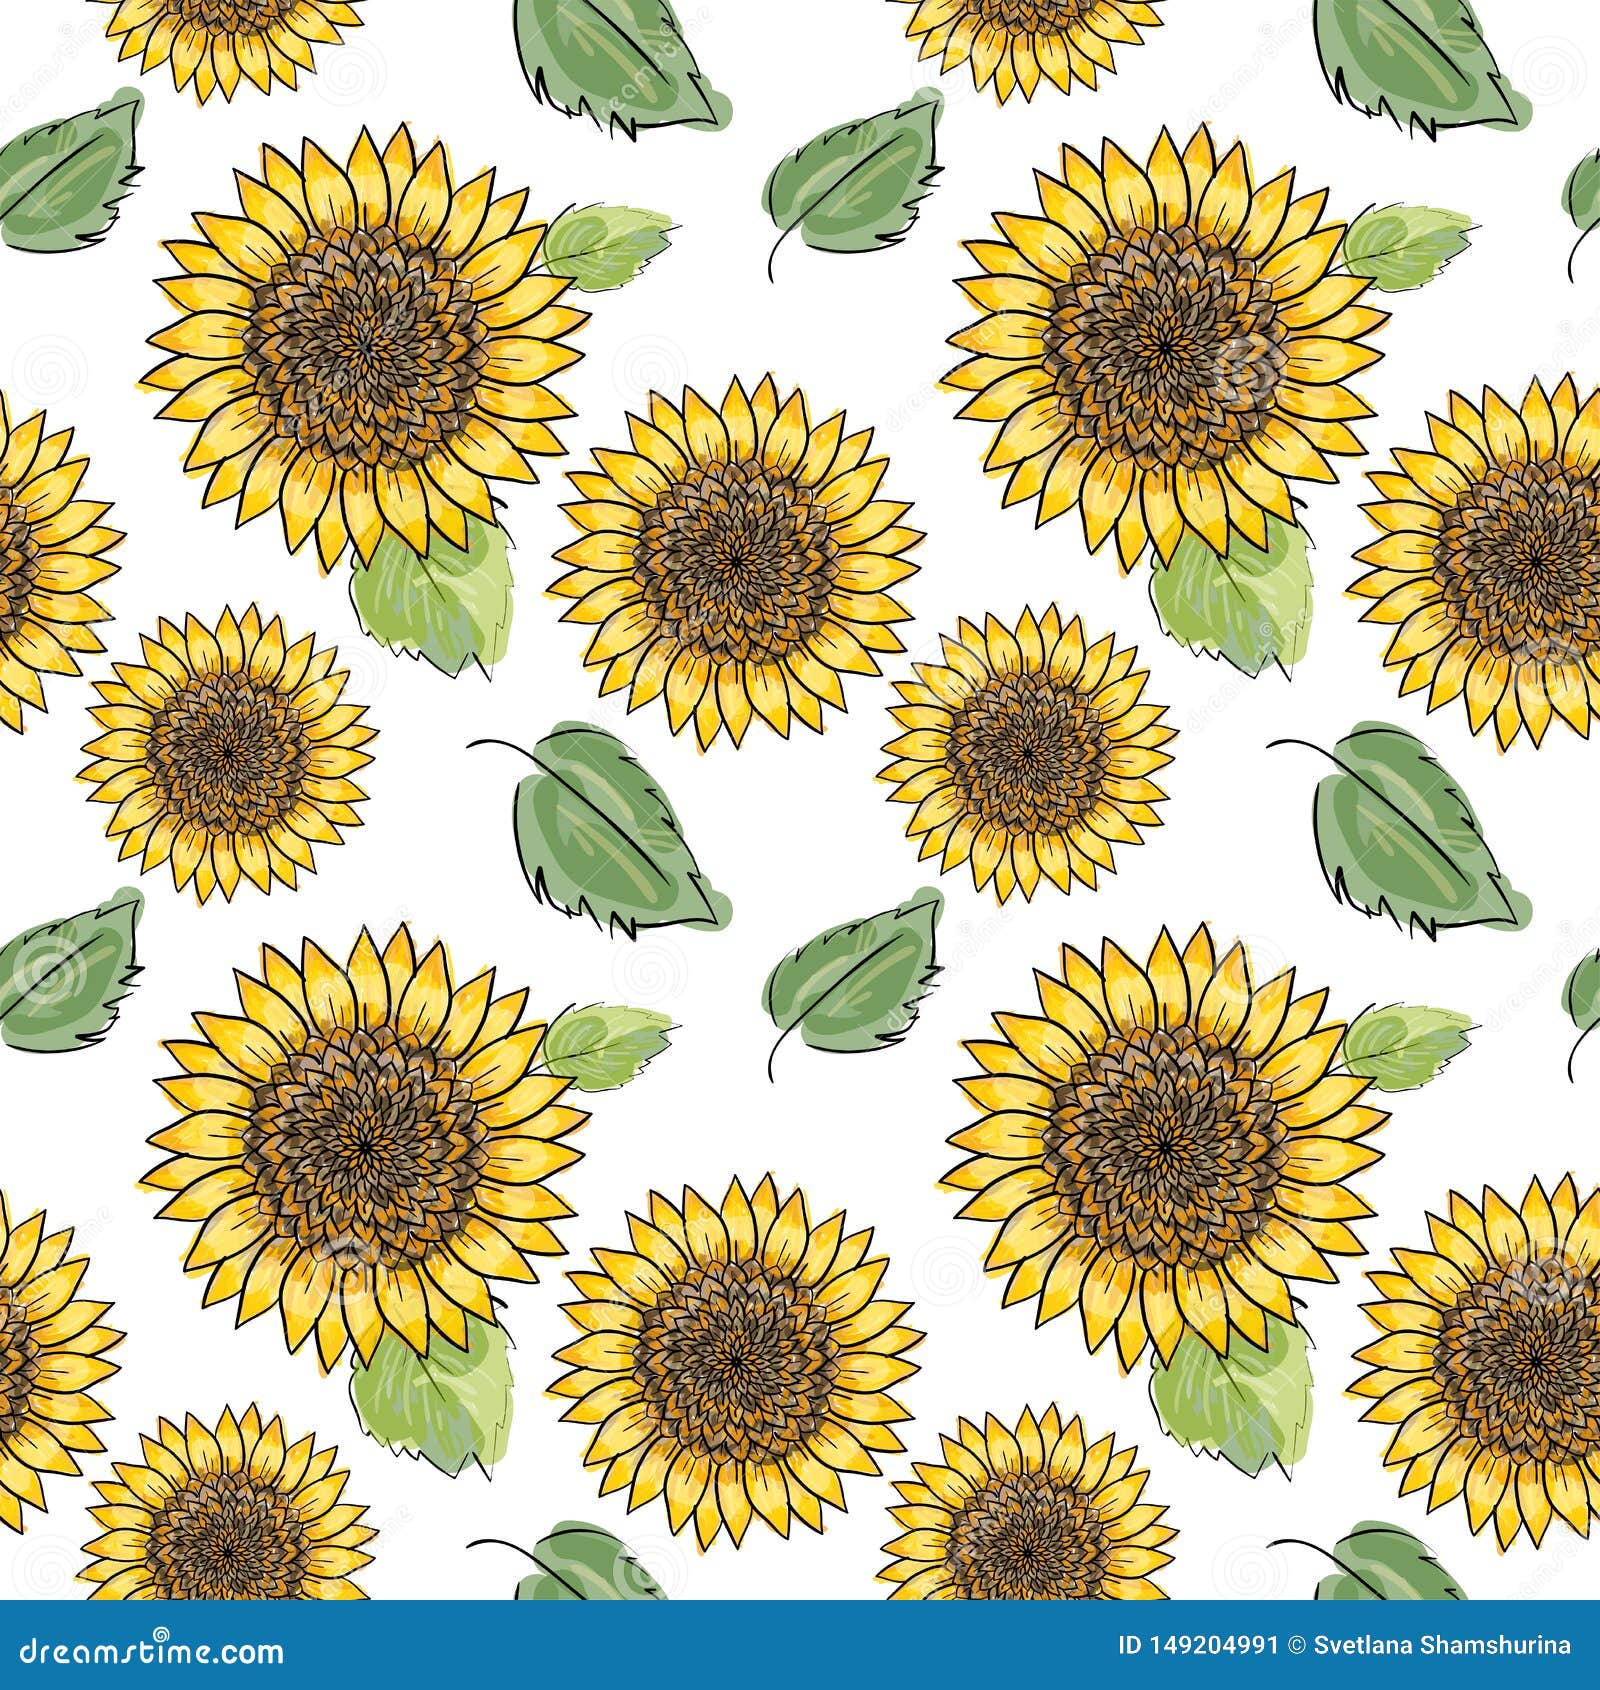 Download Sunflower Vector Seamless Pattern With Green Leaves ...